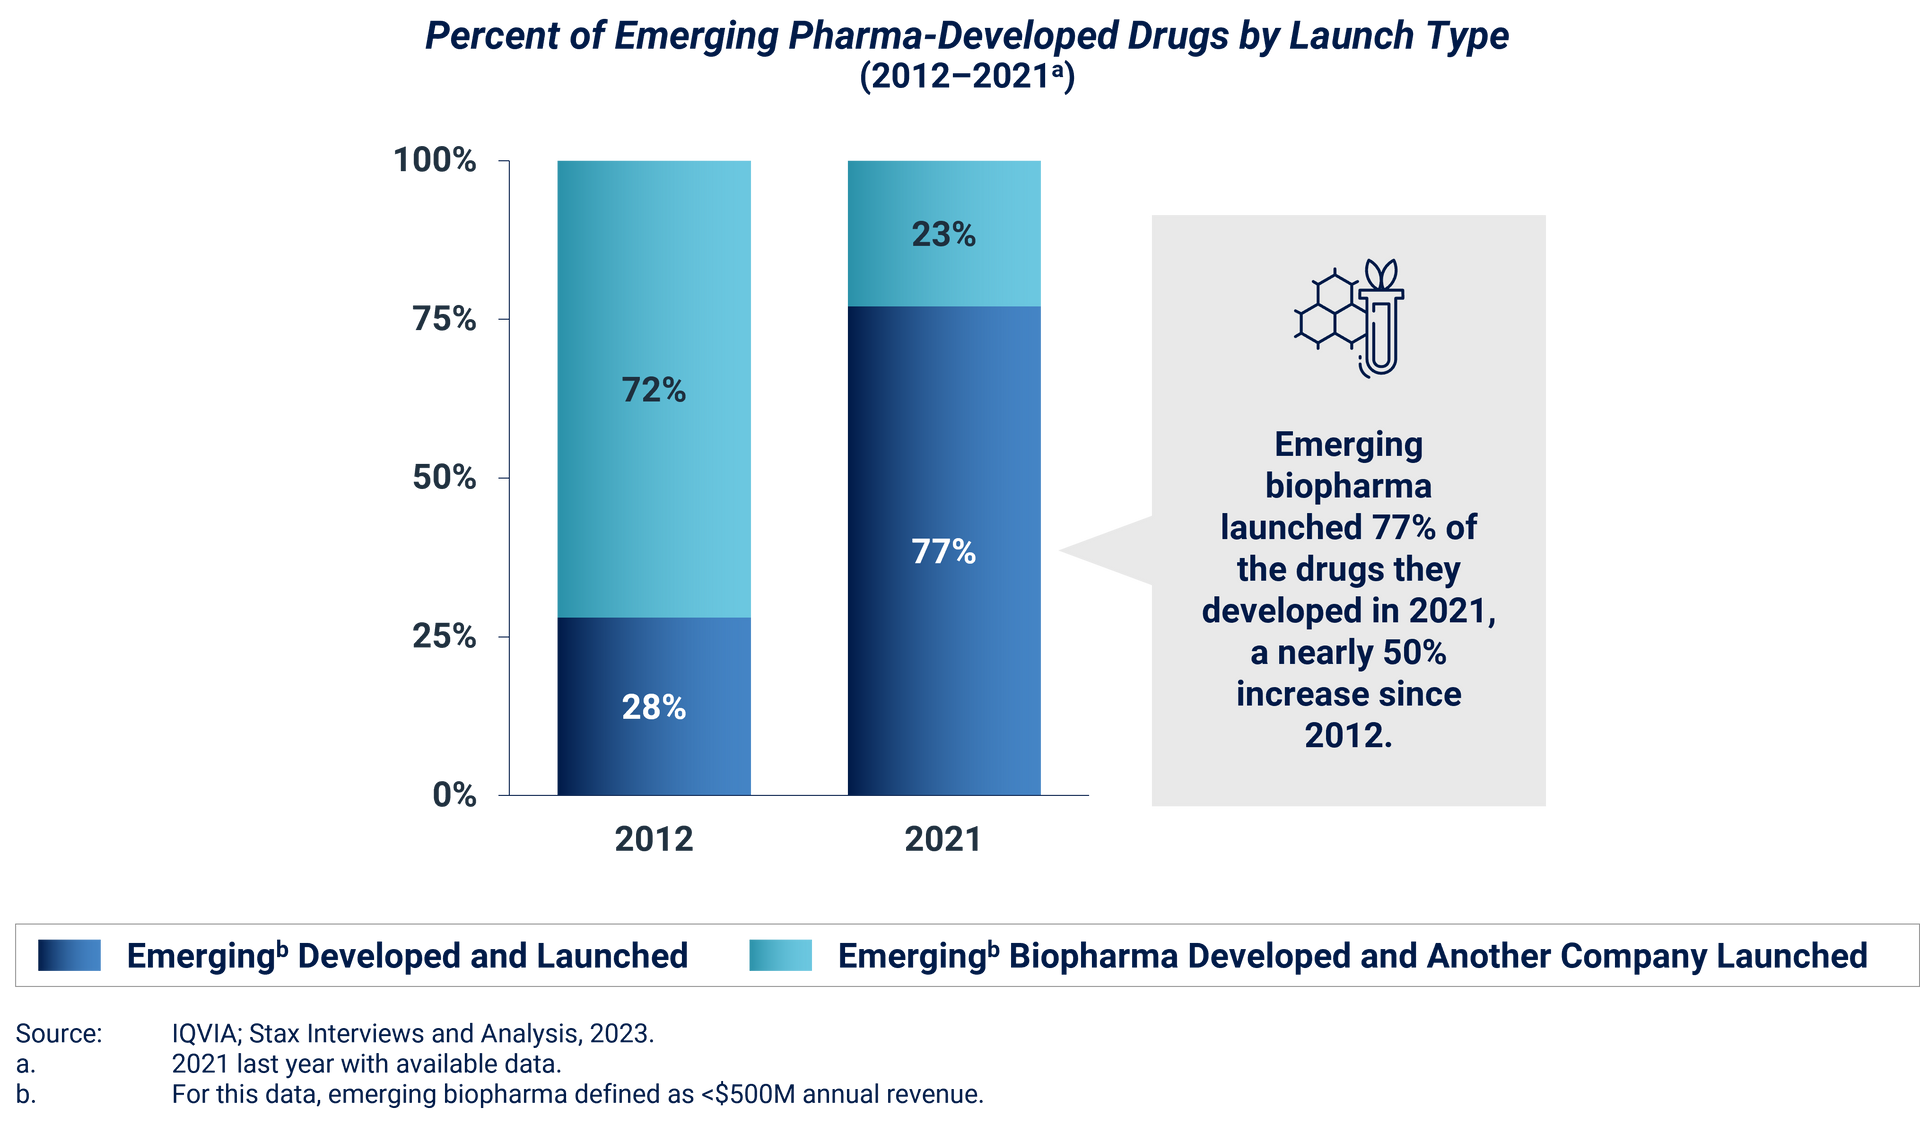 Percent of Emerging Pharma-Developed Drugs by Launch Type (2012-2021). Emerging biopharma launched 77% of the drugs they developed in 2021, a nearly 50% increase since 2012. 